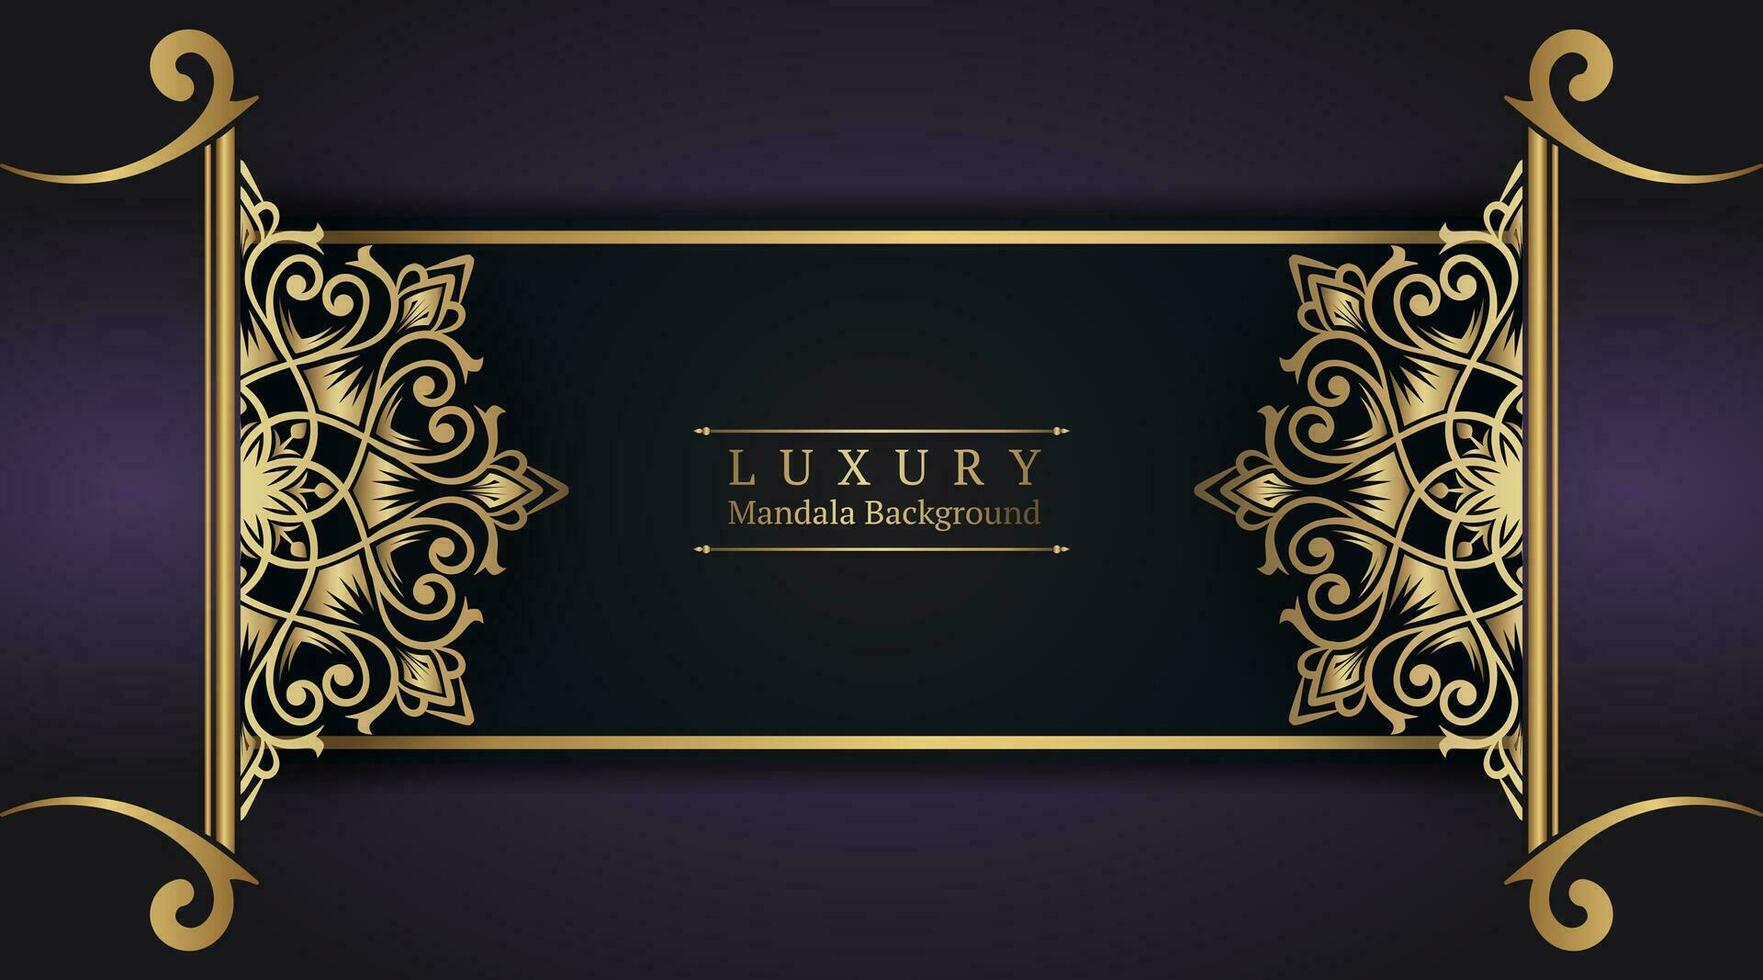 Luxury background  with mandala ornament vector